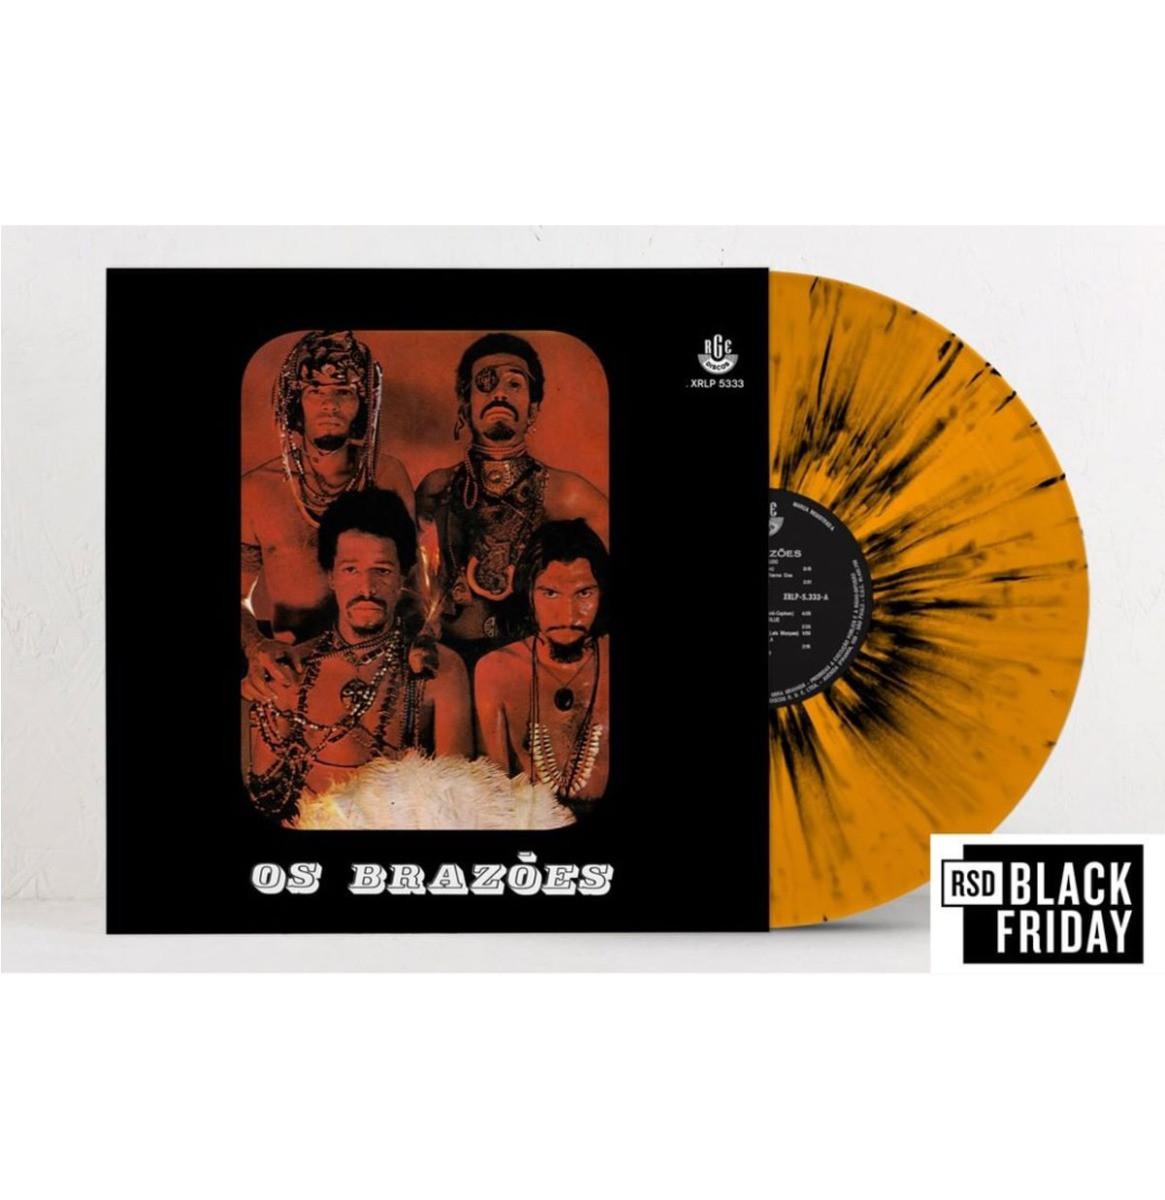 Os Brazoes - Os Brazoes (Record Store Day Black Friday 2021) LP